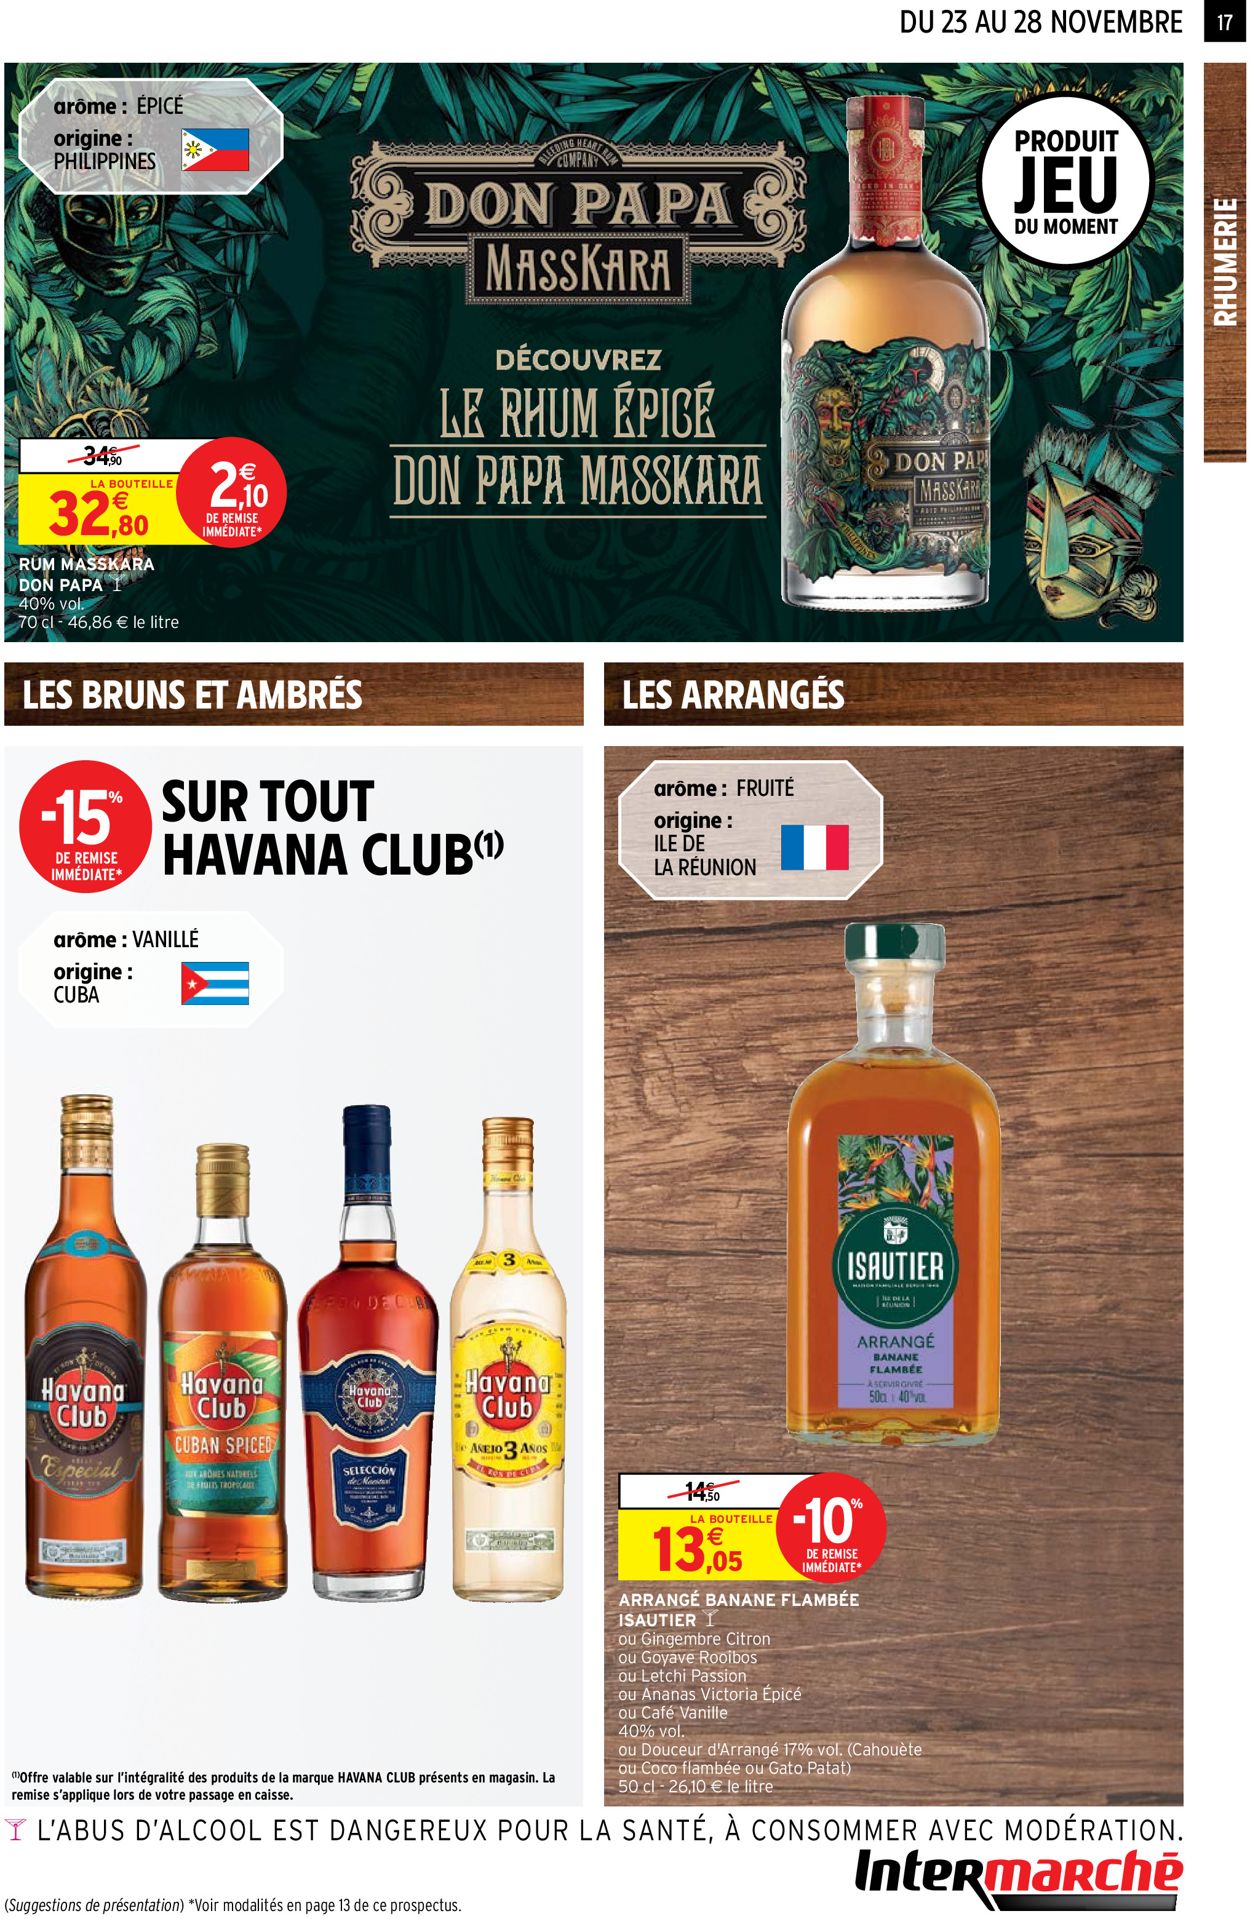 Intermarché  BLACK WEEK 2021 Catalogue - 23.11-28.11.2021 (Page 17)